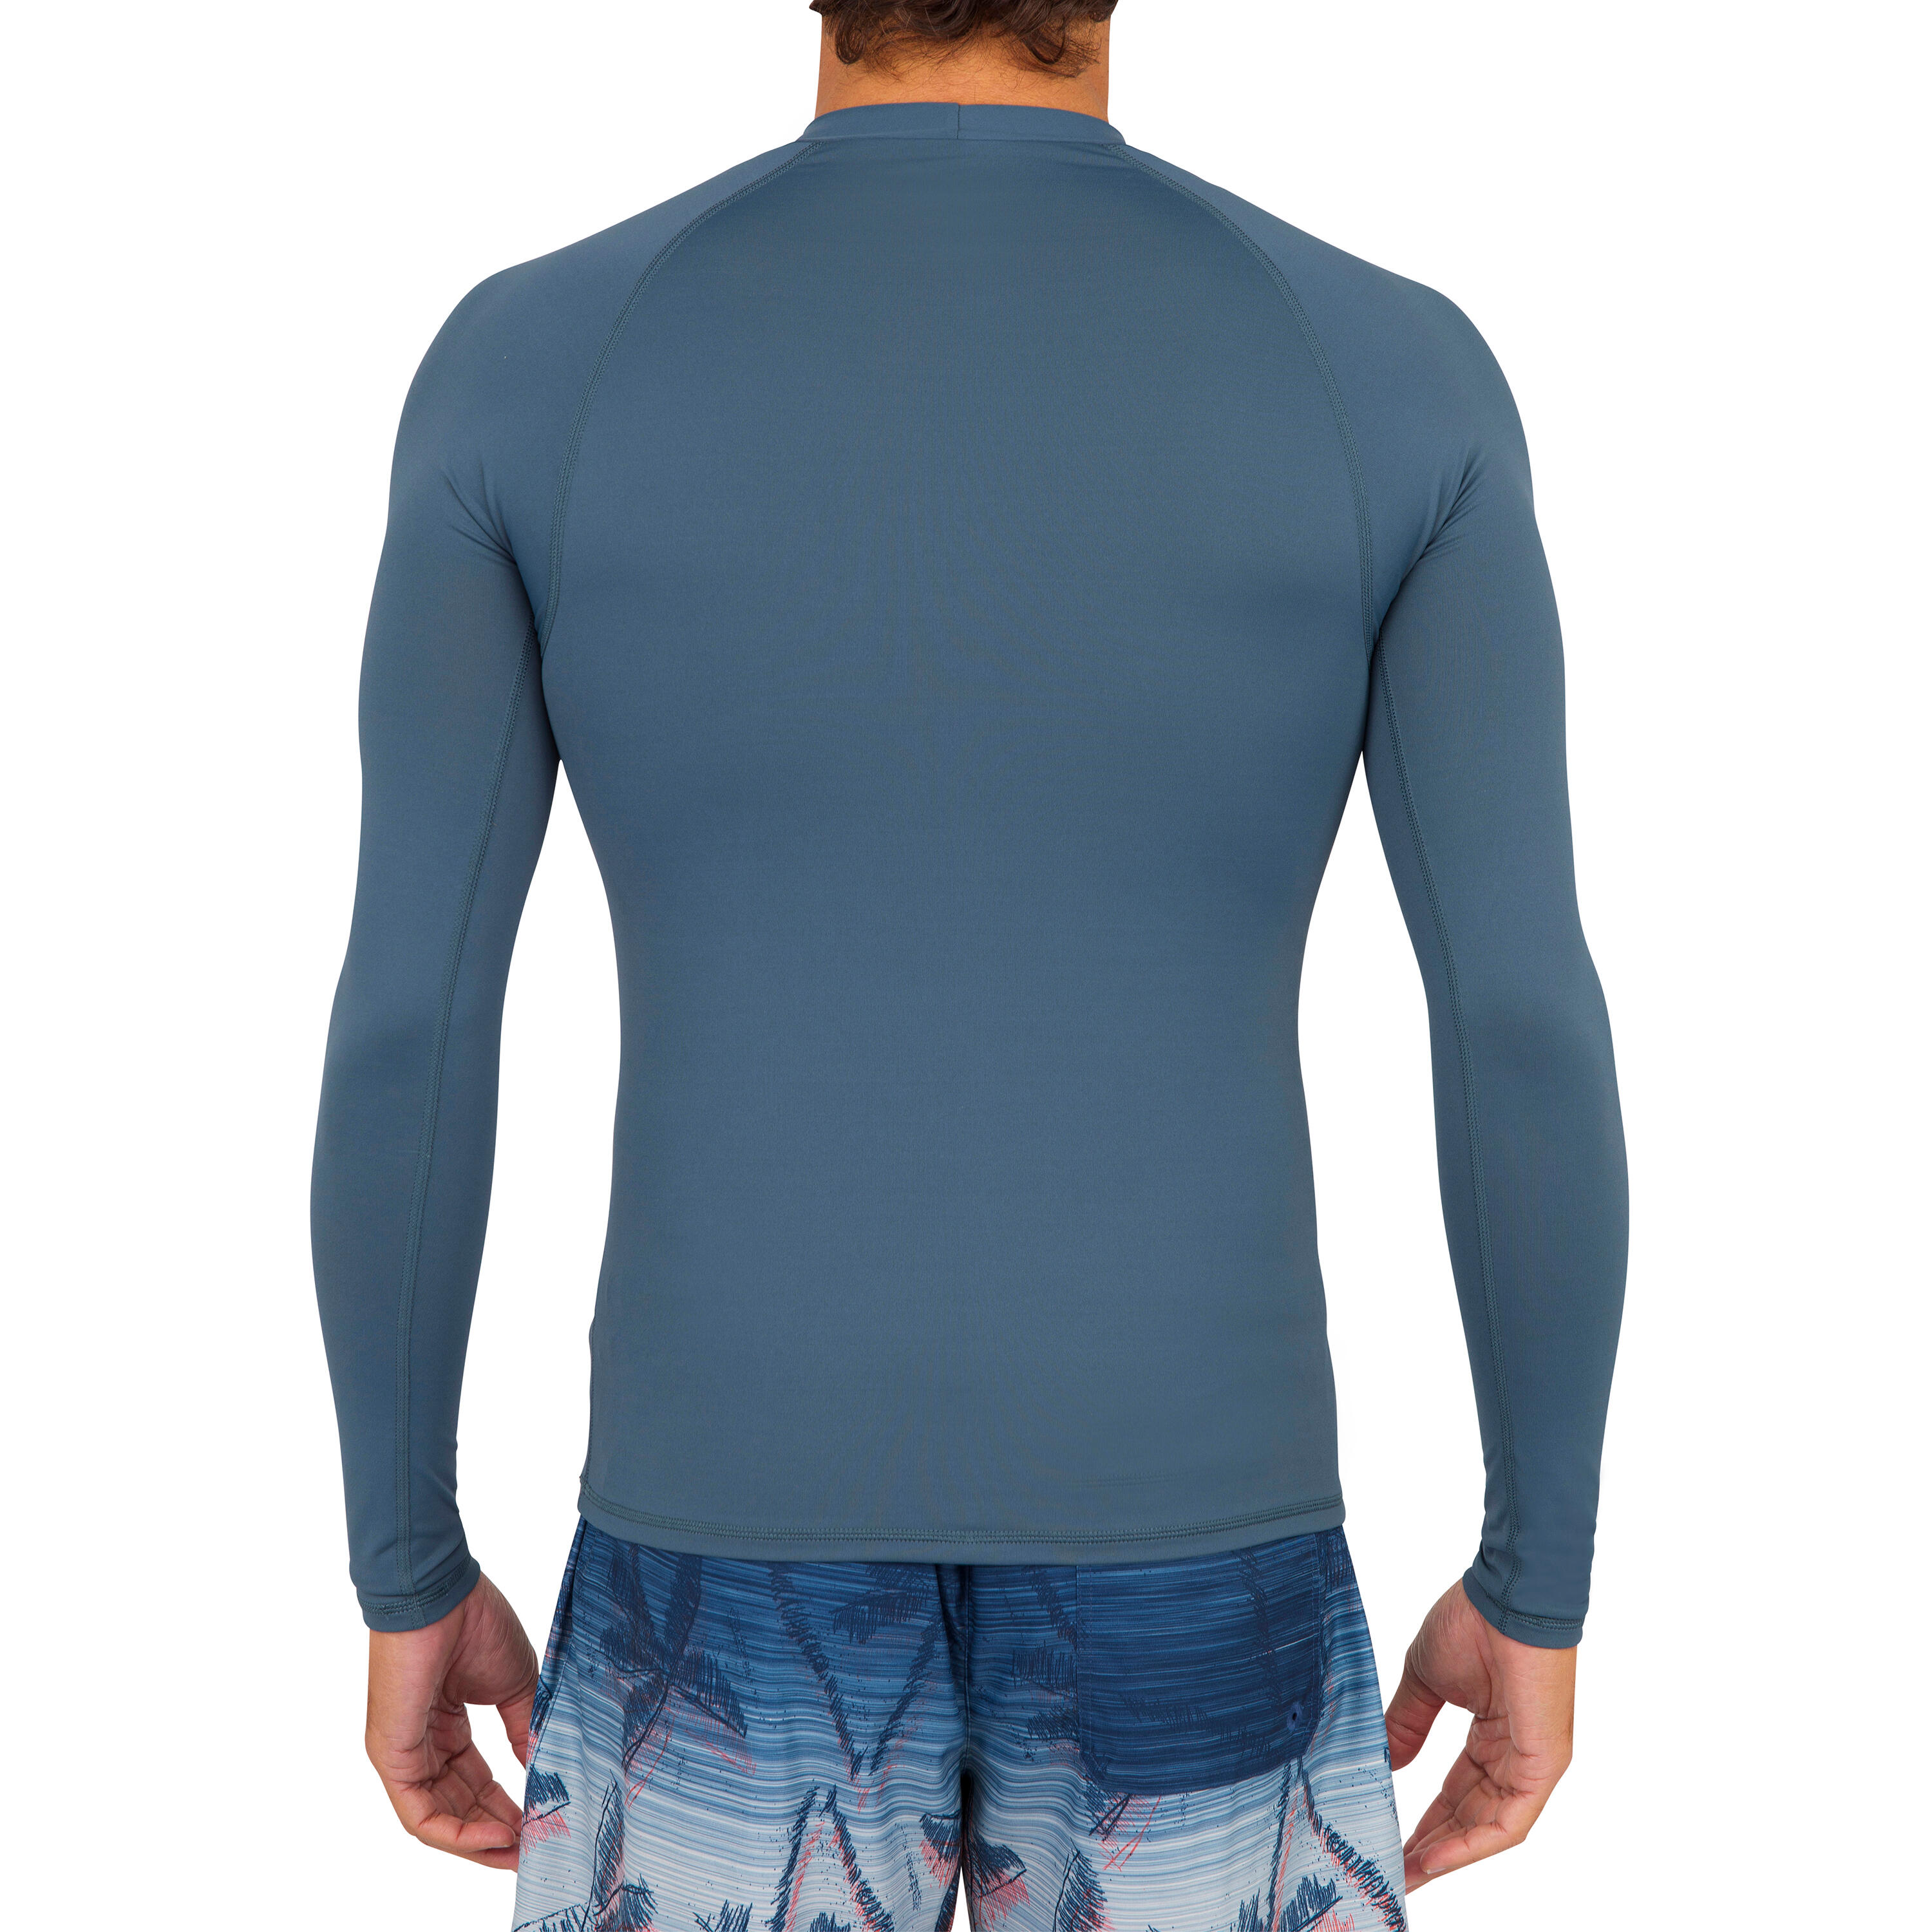 Men's surfing long-sleeved UV-protection top T-shirt 100 - grey 3/5